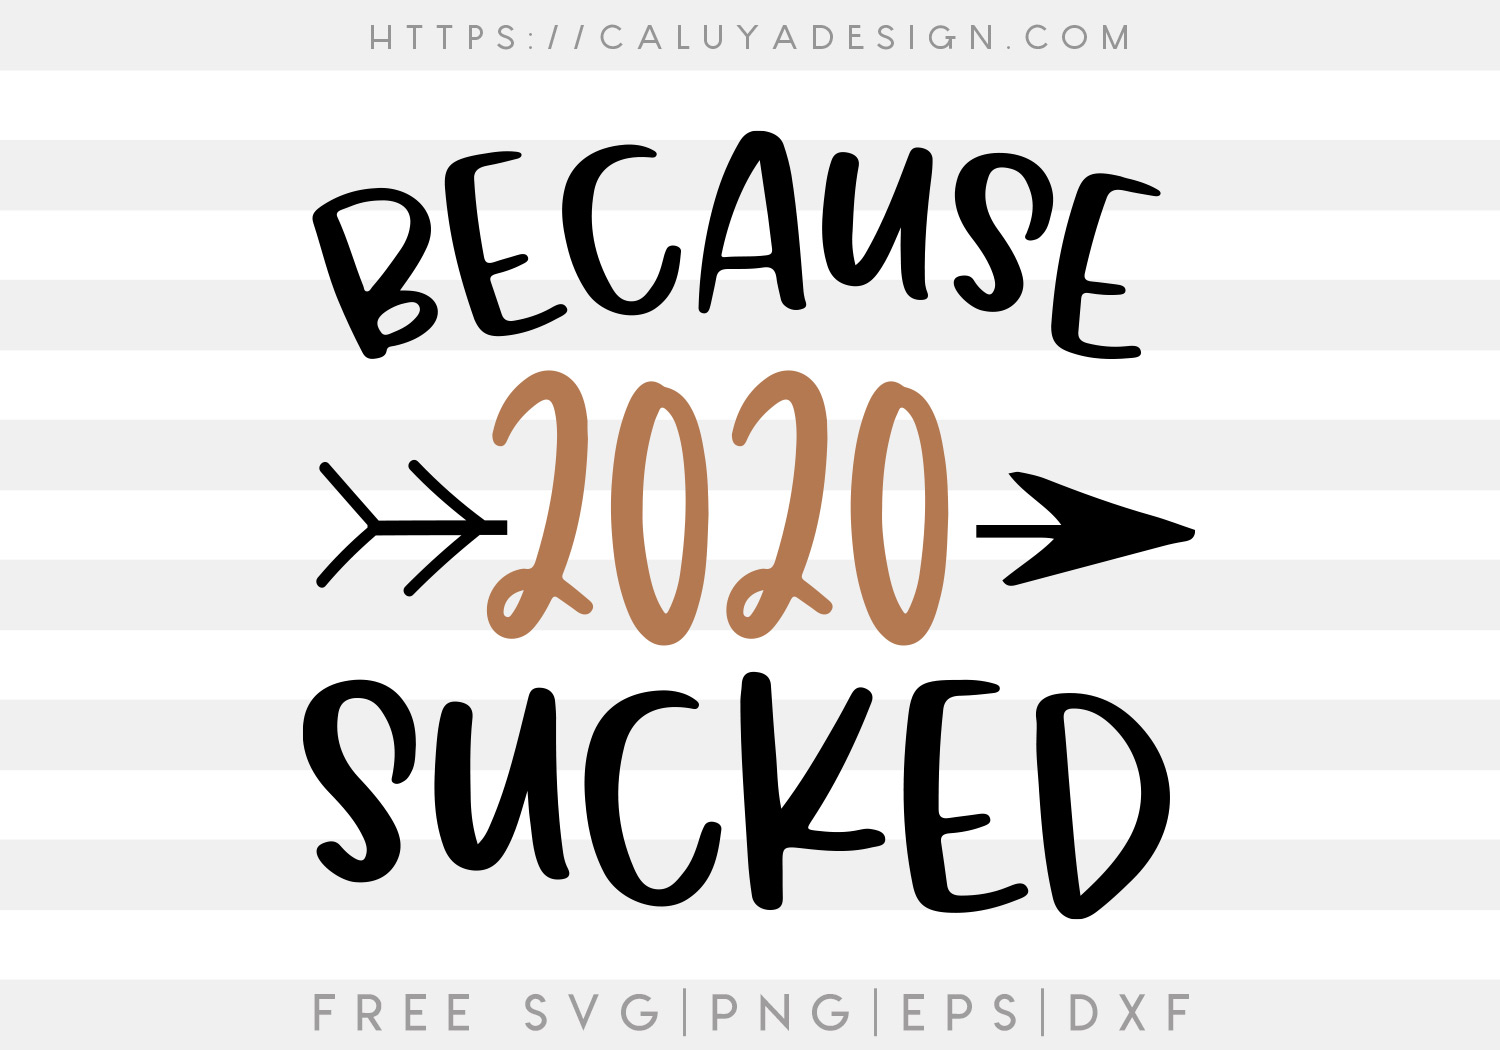 Free Because 2020 Sucked SVG Cut File